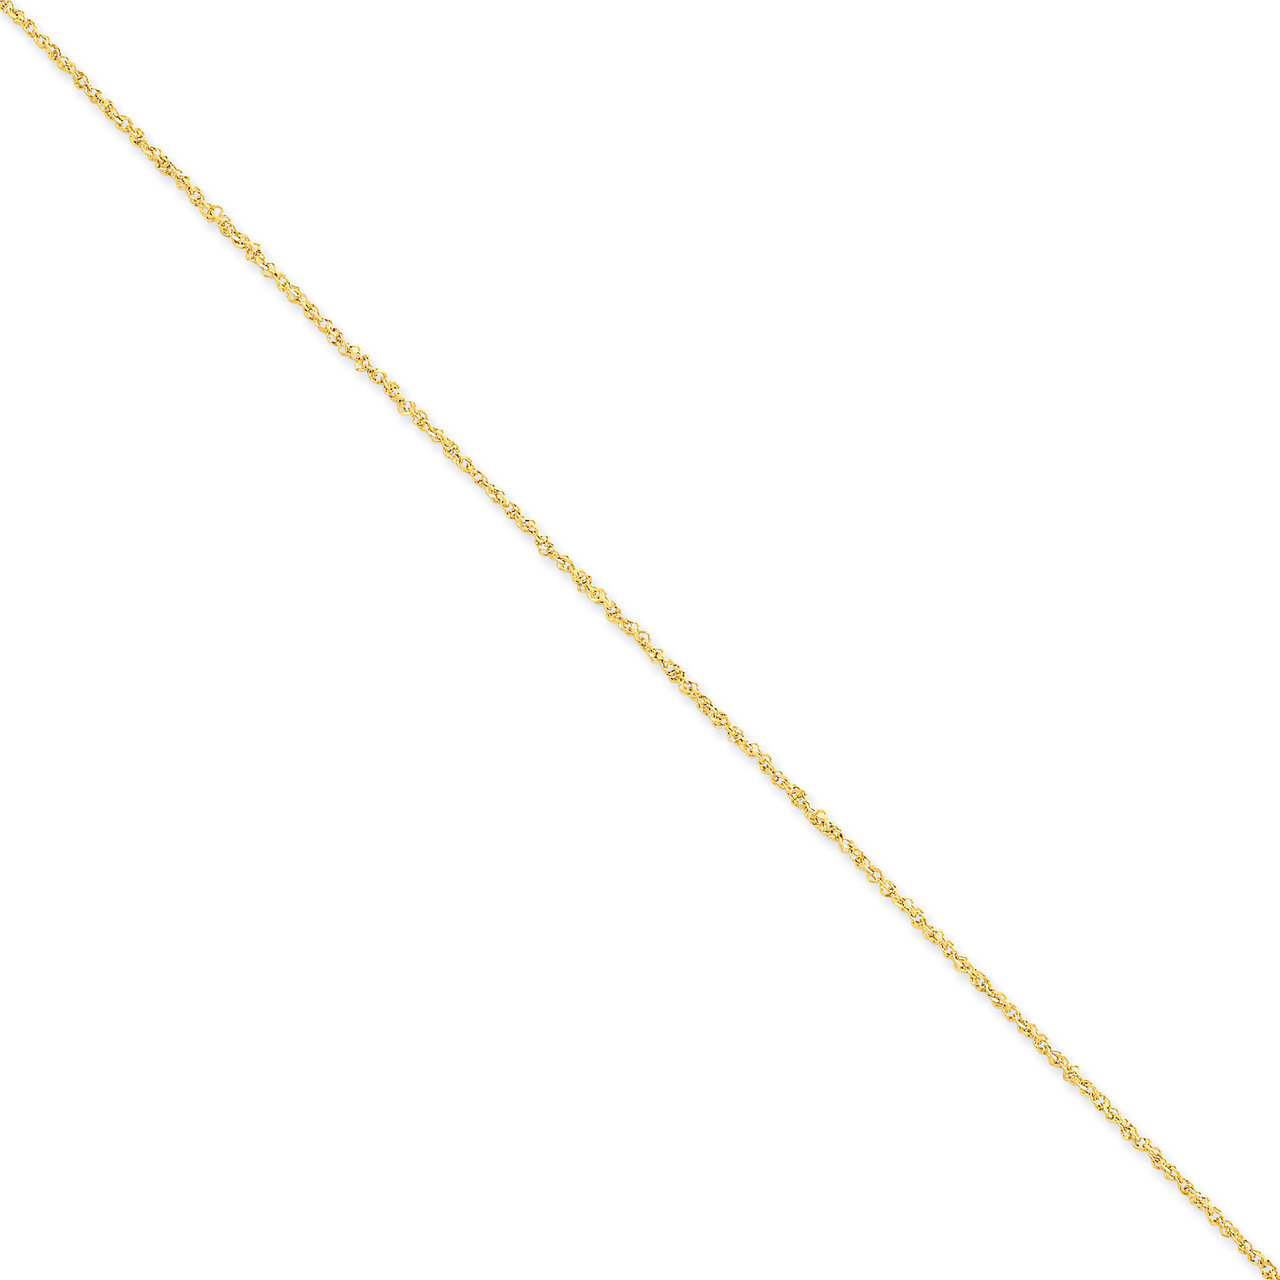 1.7mm Ropa Chain Anklet 10 Inch 14k Gold RPA028-10